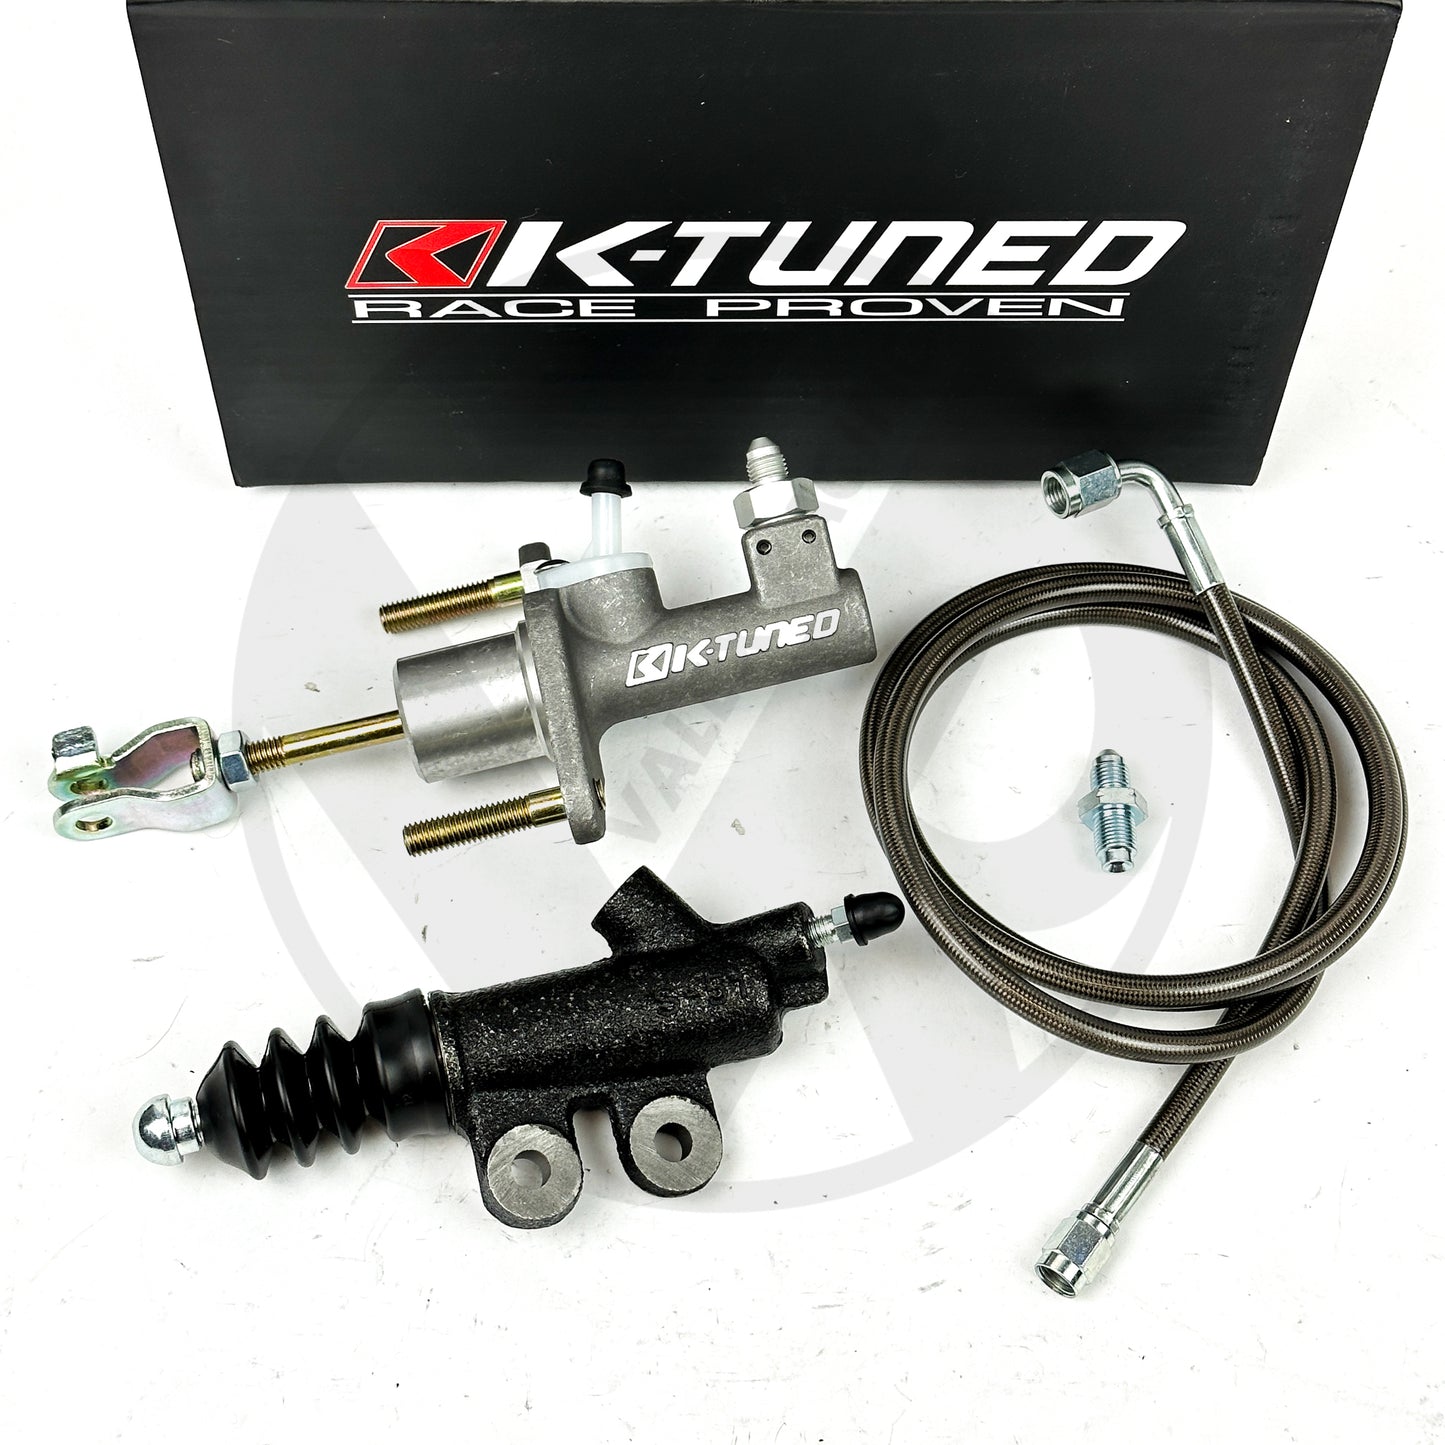 K-Tuned EM2 Clutch Master Exedy Slave Kit for 92-95 Honda Civic EG with Stainless Steel Clutch Line